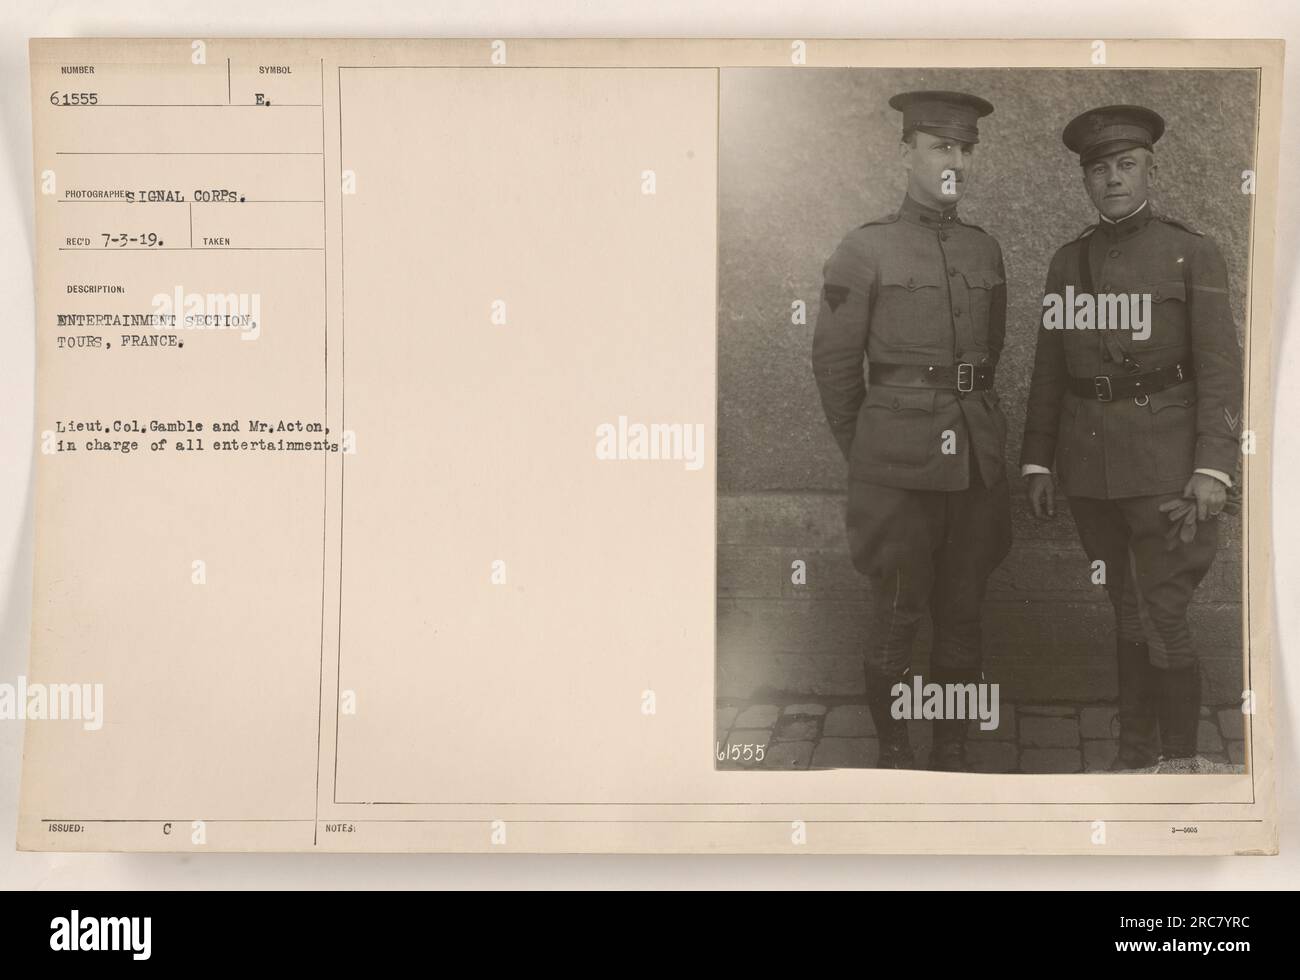 Lieutenant Colonel Gamble and Mr. Acton, in charge of organizing entertainments for the American military stationed in Tours, France. This photograph was taken on March 7, 1919, and is part of the collection of photographs depicting American military activities during World War I. Stock Photo